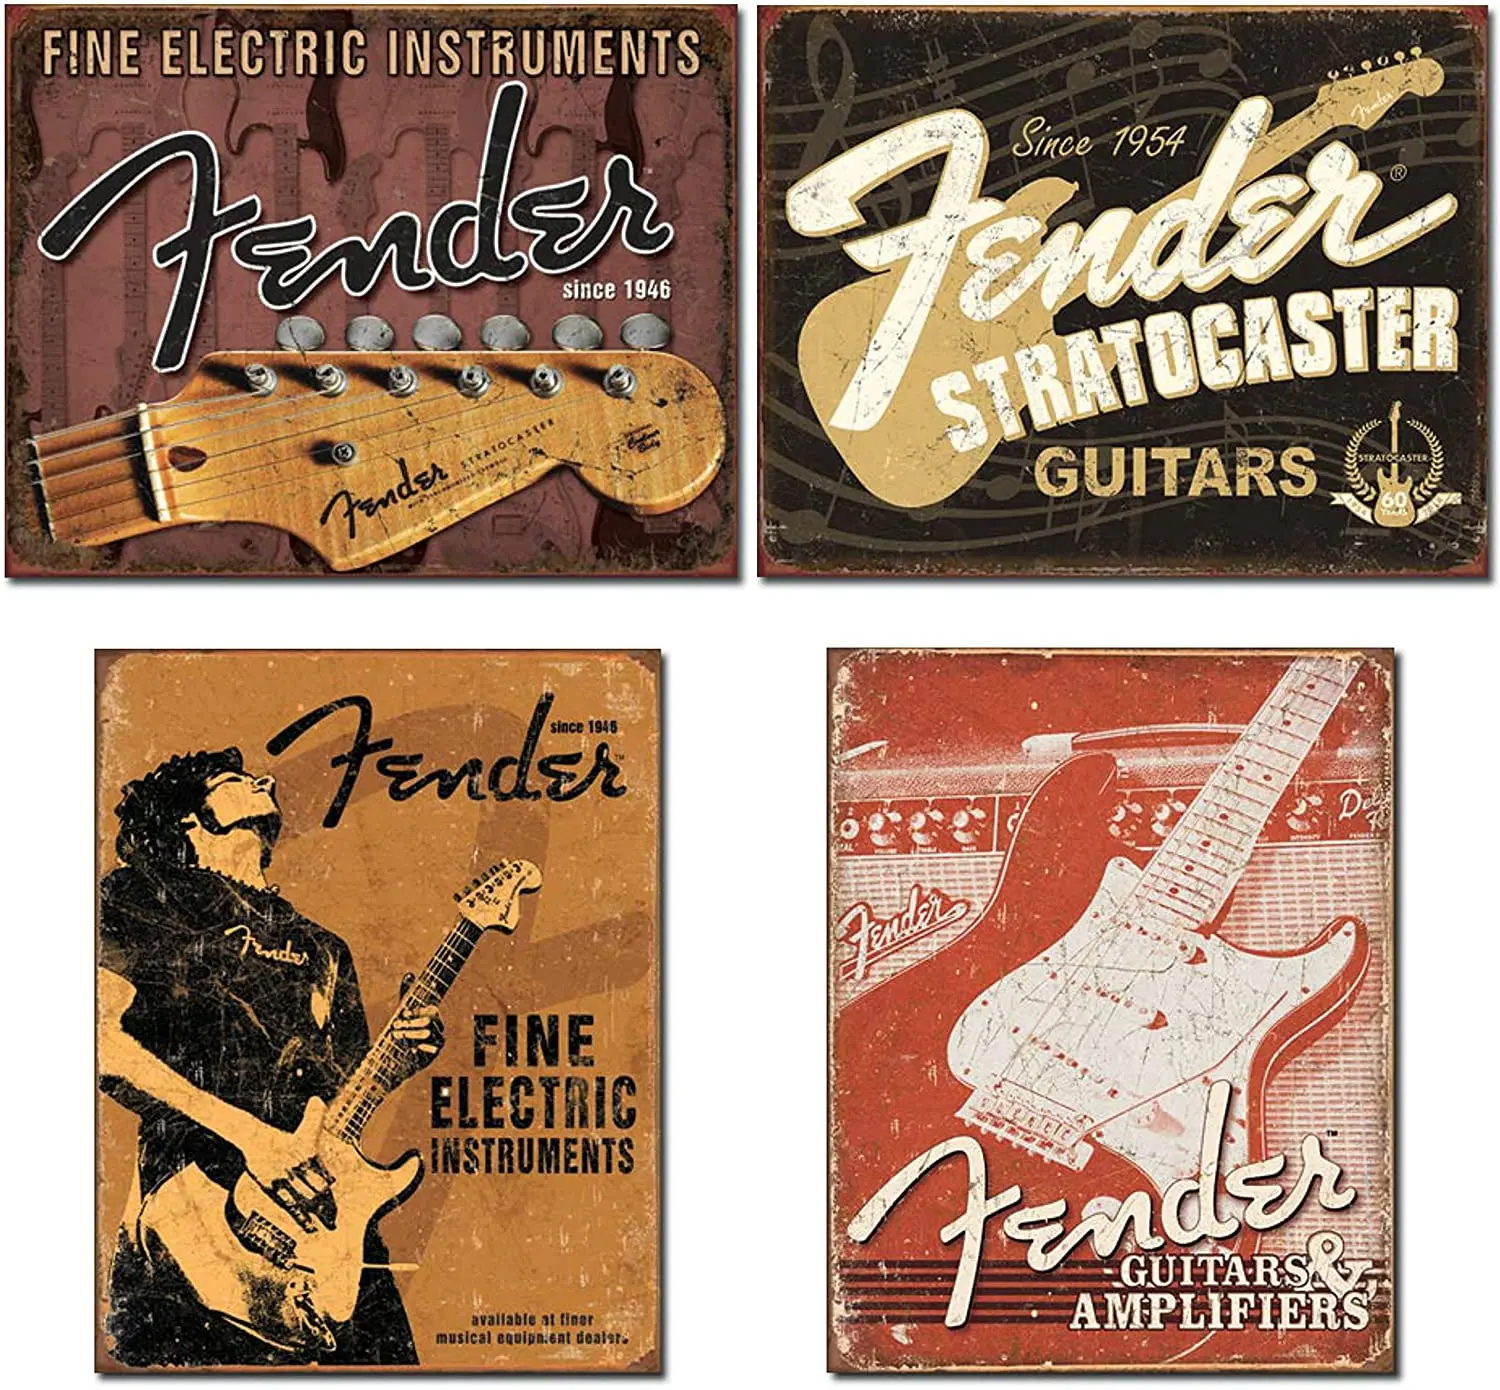 

Retro Tin Sign Fender Stratocaster Guitars Metal Wall Sign Poster Bar Bistro Club Club House Wall Decoration Metal Sign 20*30 CM